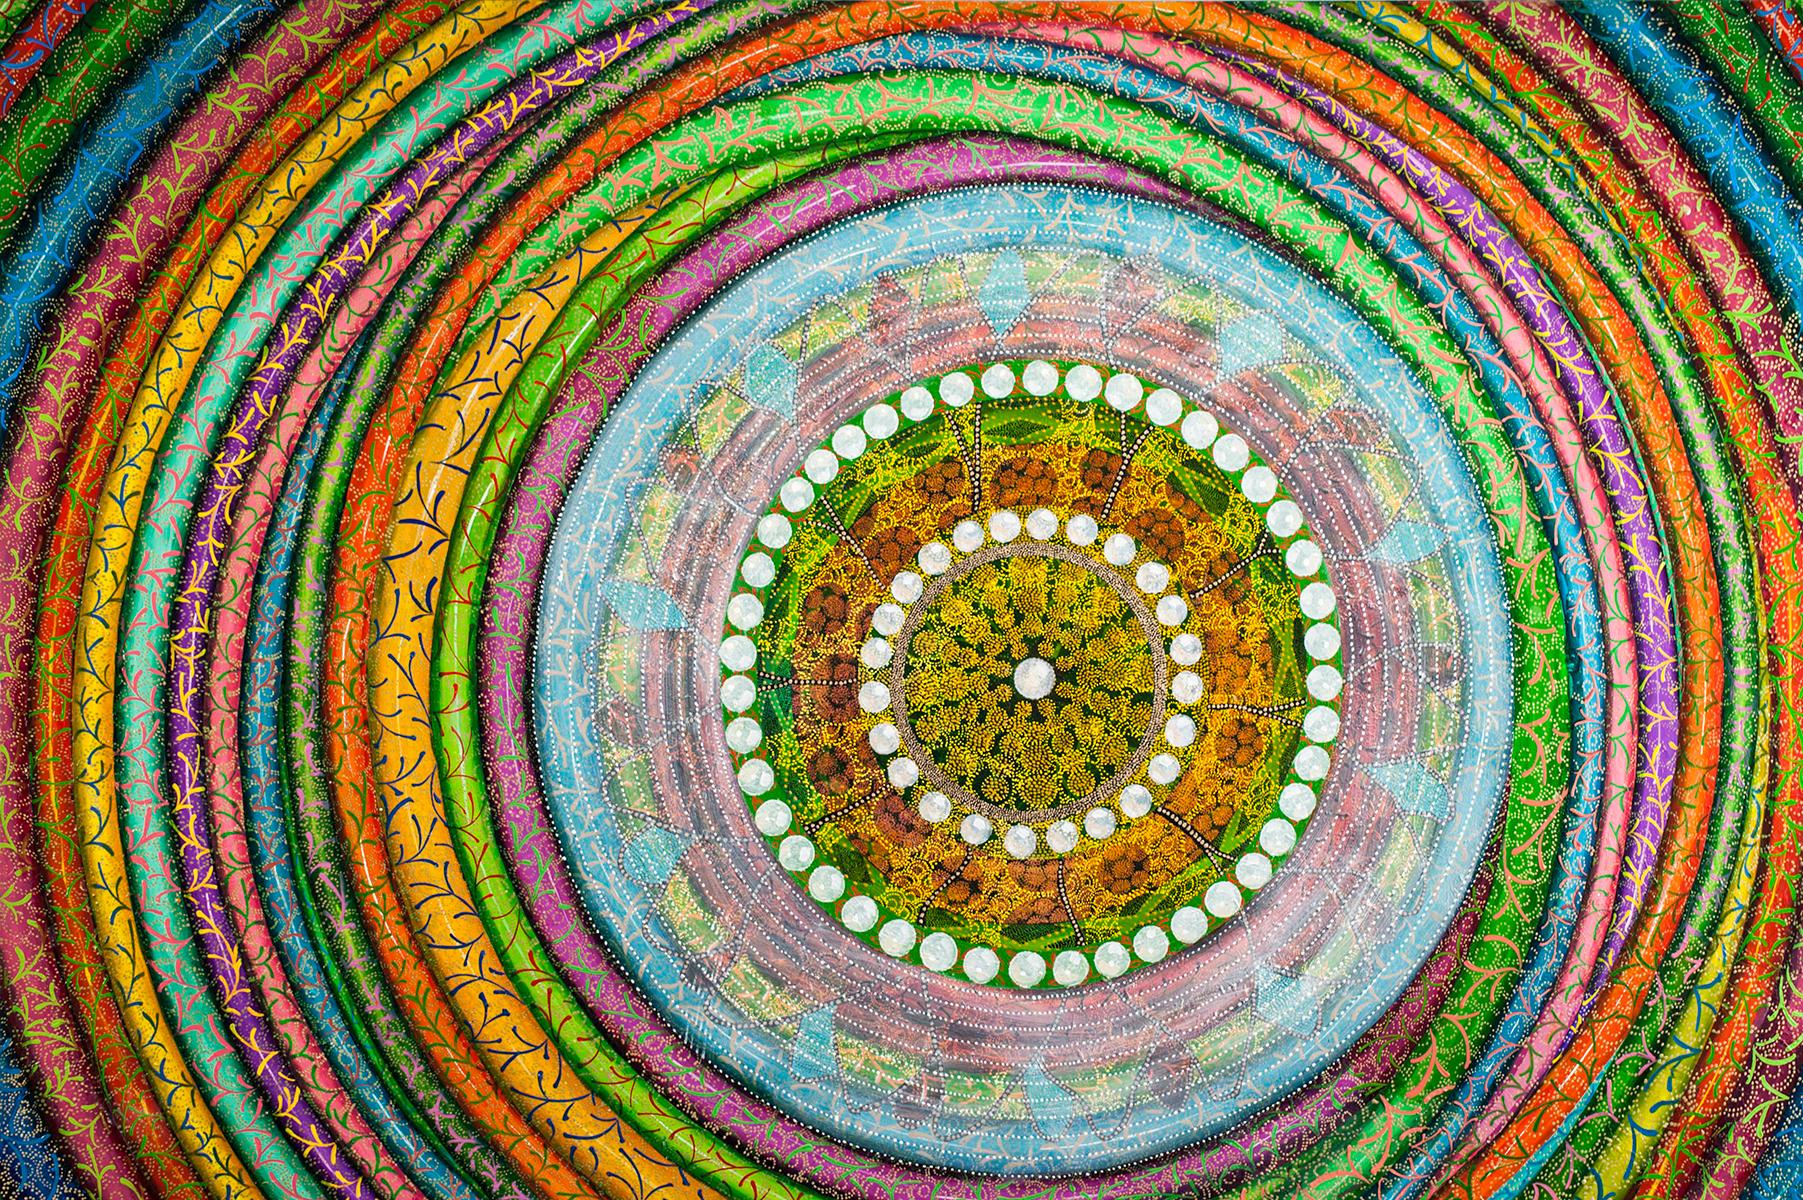 "WE SPIN A WORLD" is one of a limited edition of 30 prints of an original oil painting on canvas by Amy Cheng. The painting is part of a Mandala Series she produced in the 2010's. The image in this print features hula-hoop-like decorated tubular